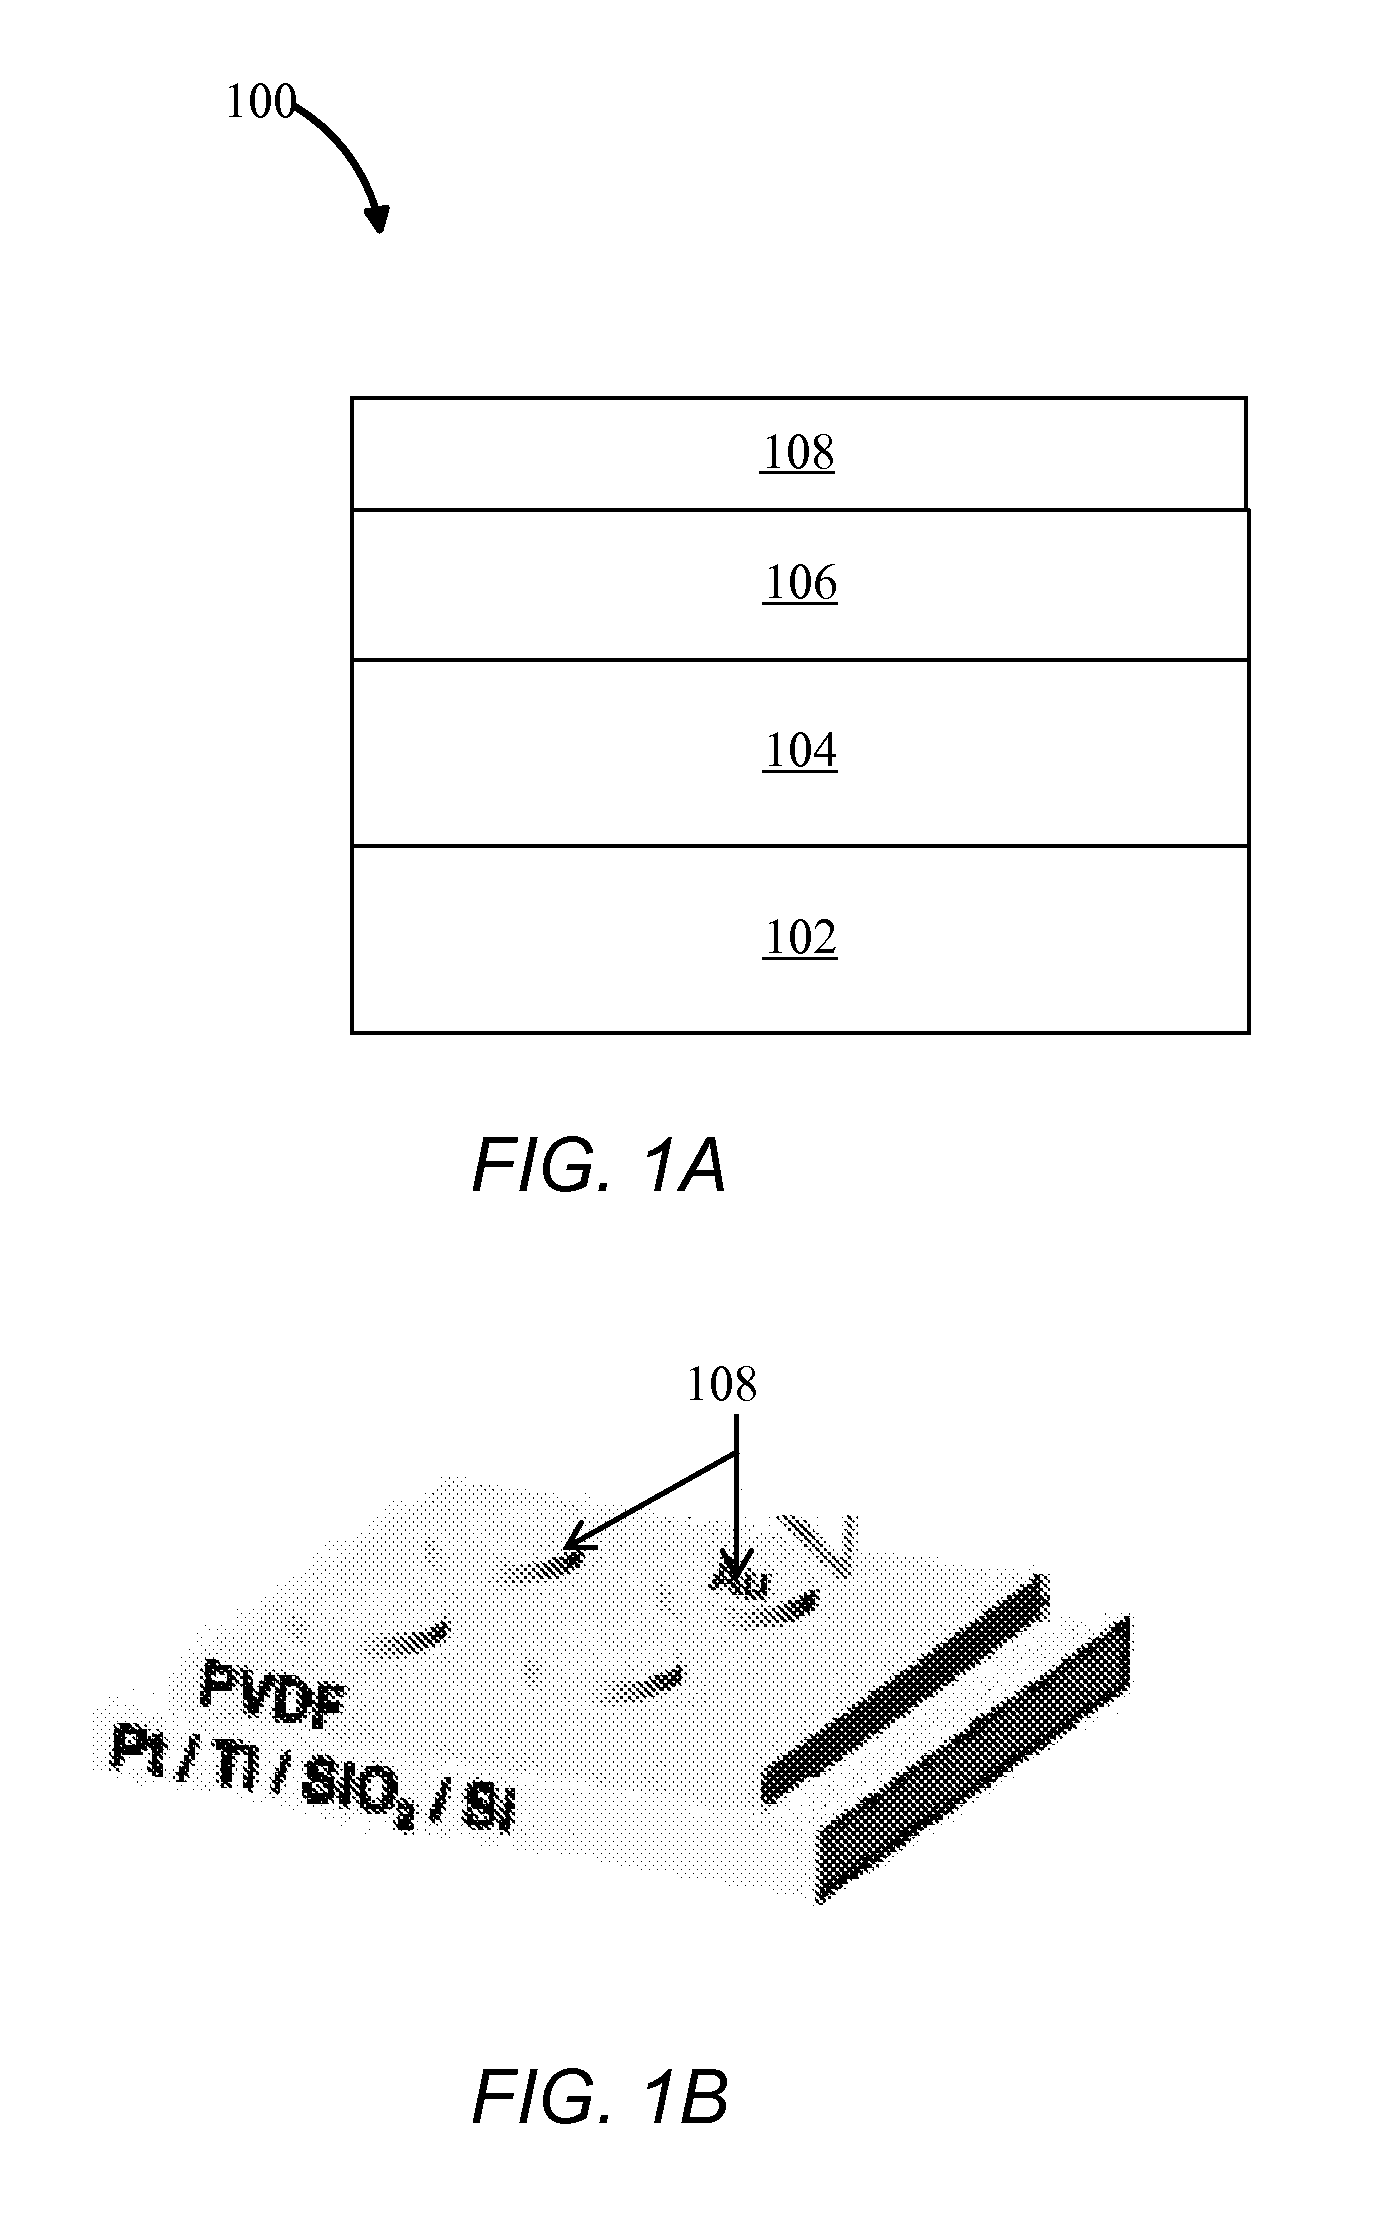 Methods for producing a thin film ferroelectric device using a two-step temperature process on an organic polymeric ferroelectric precursor material stacked between two conductive materials